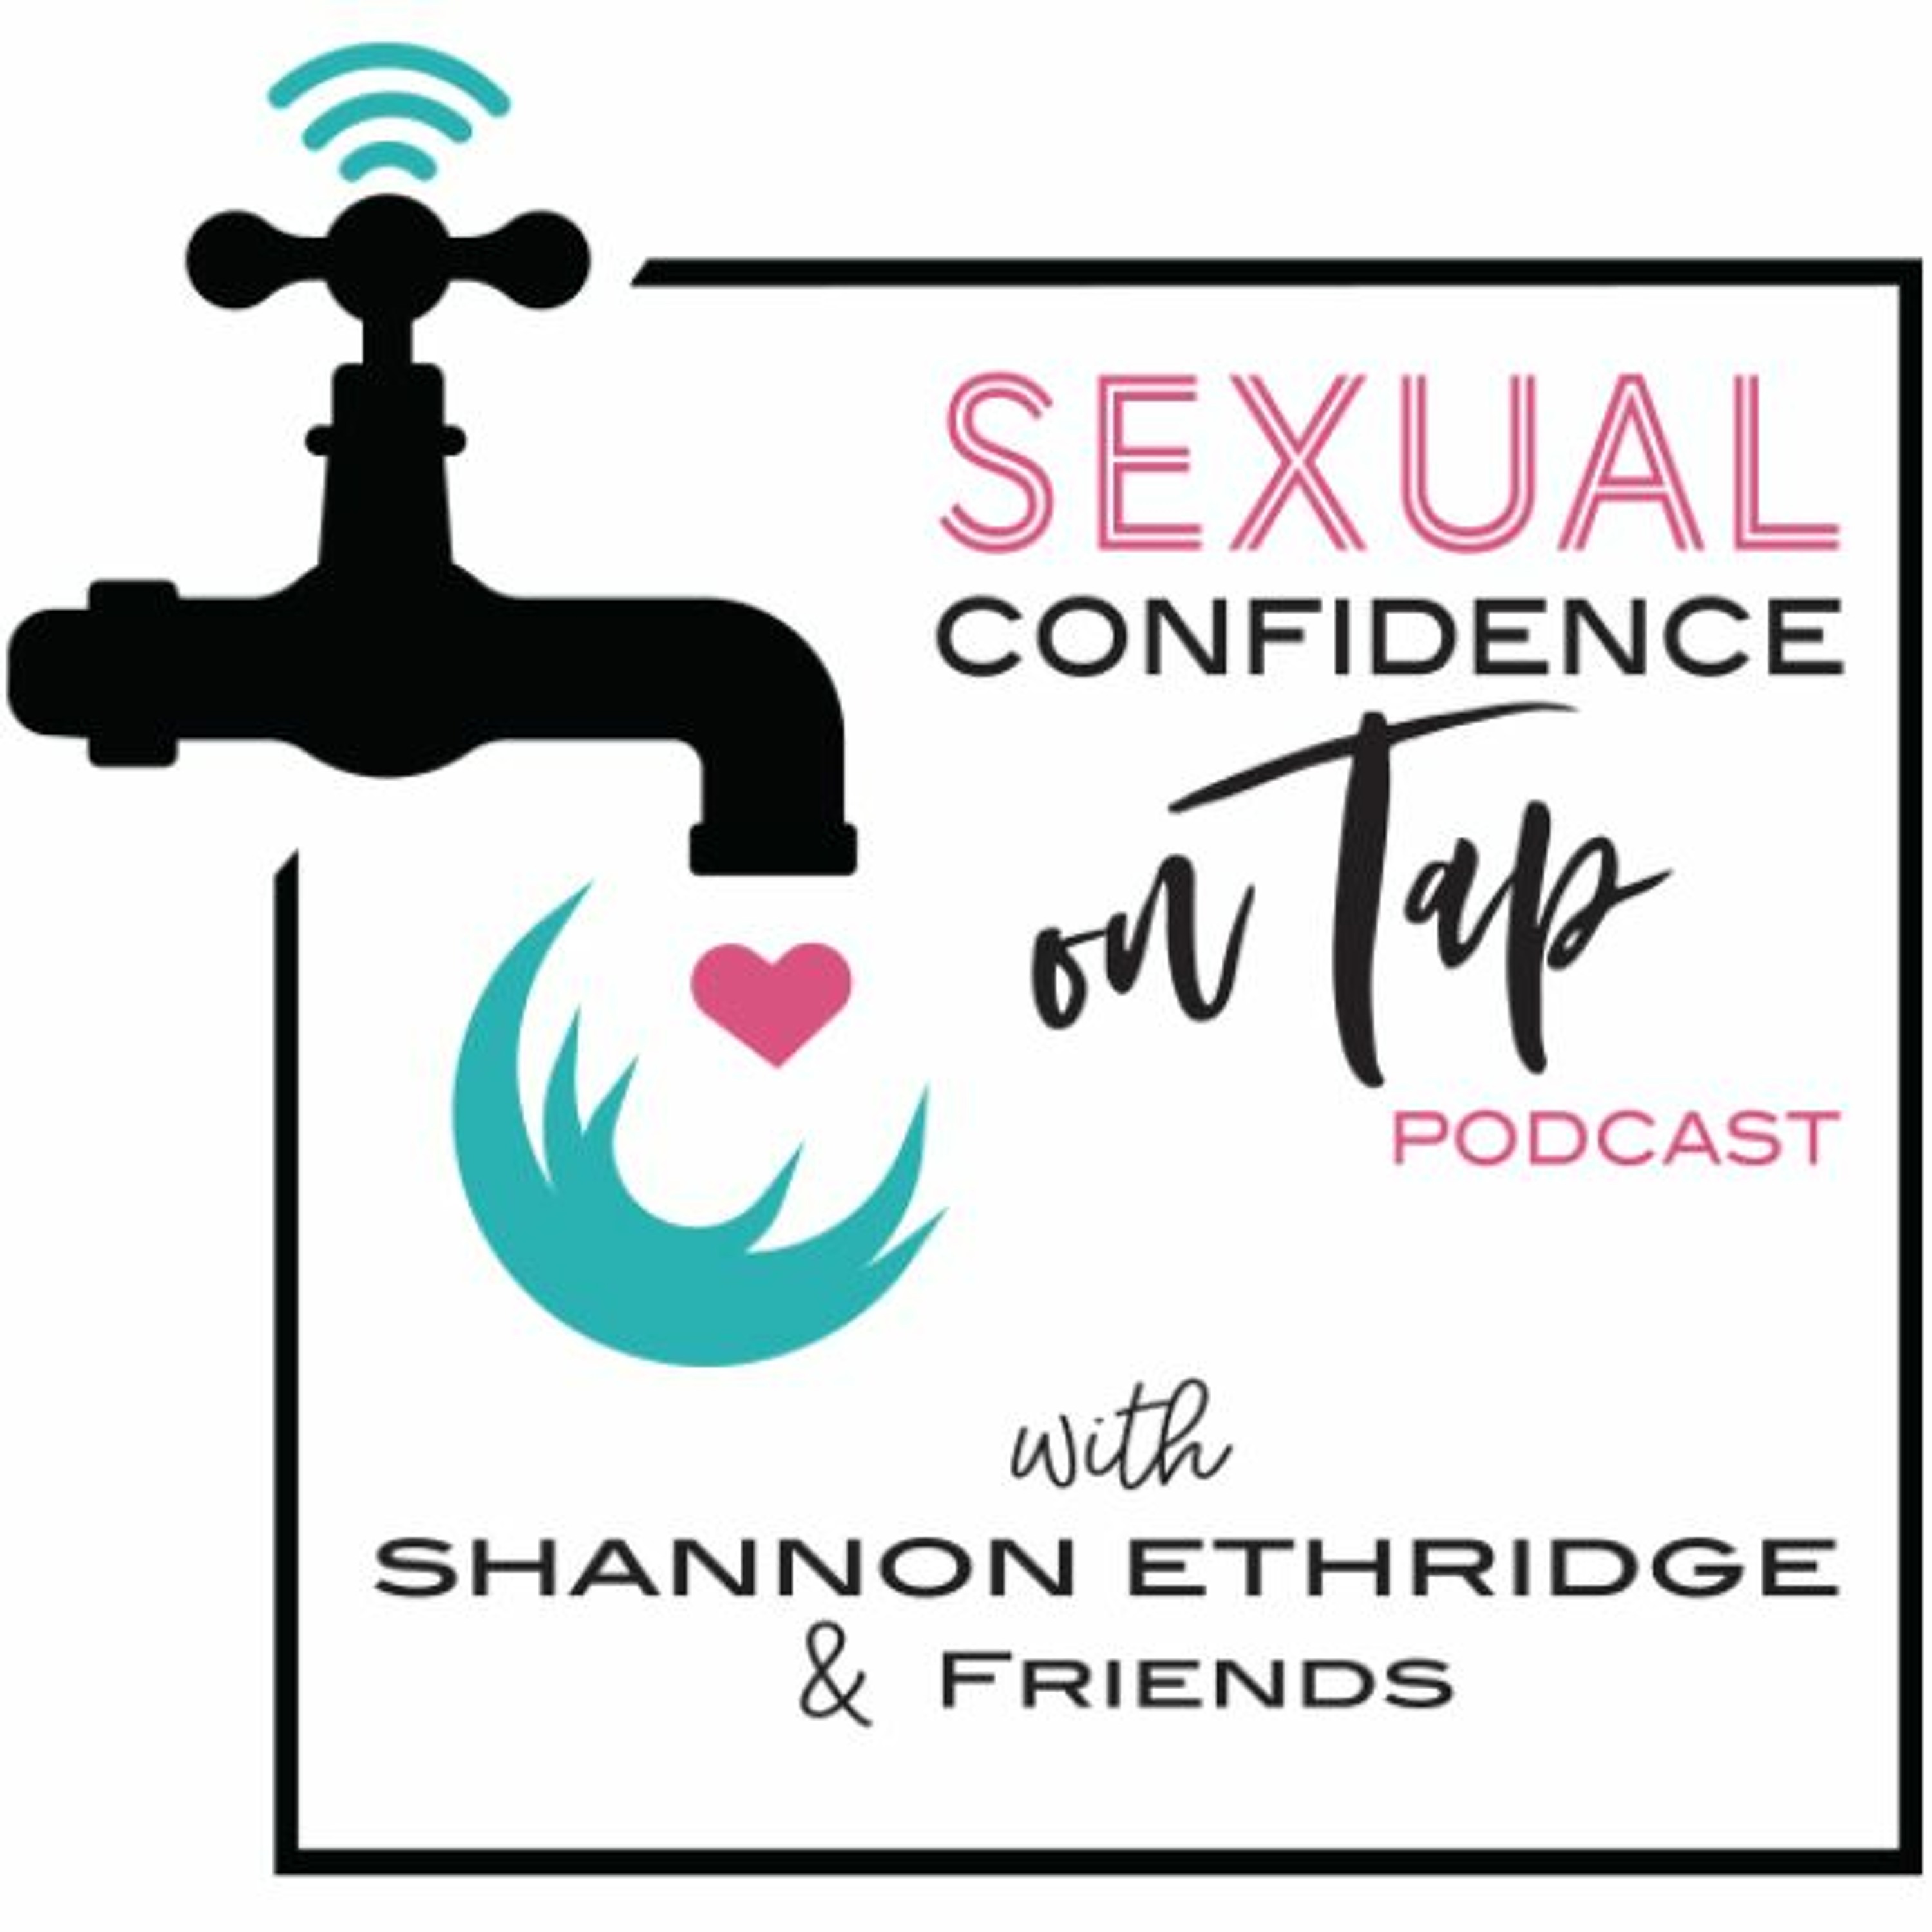 Sexual Confidence on Tap - Episode 36 - 12 Tips For Mindful Intimacy